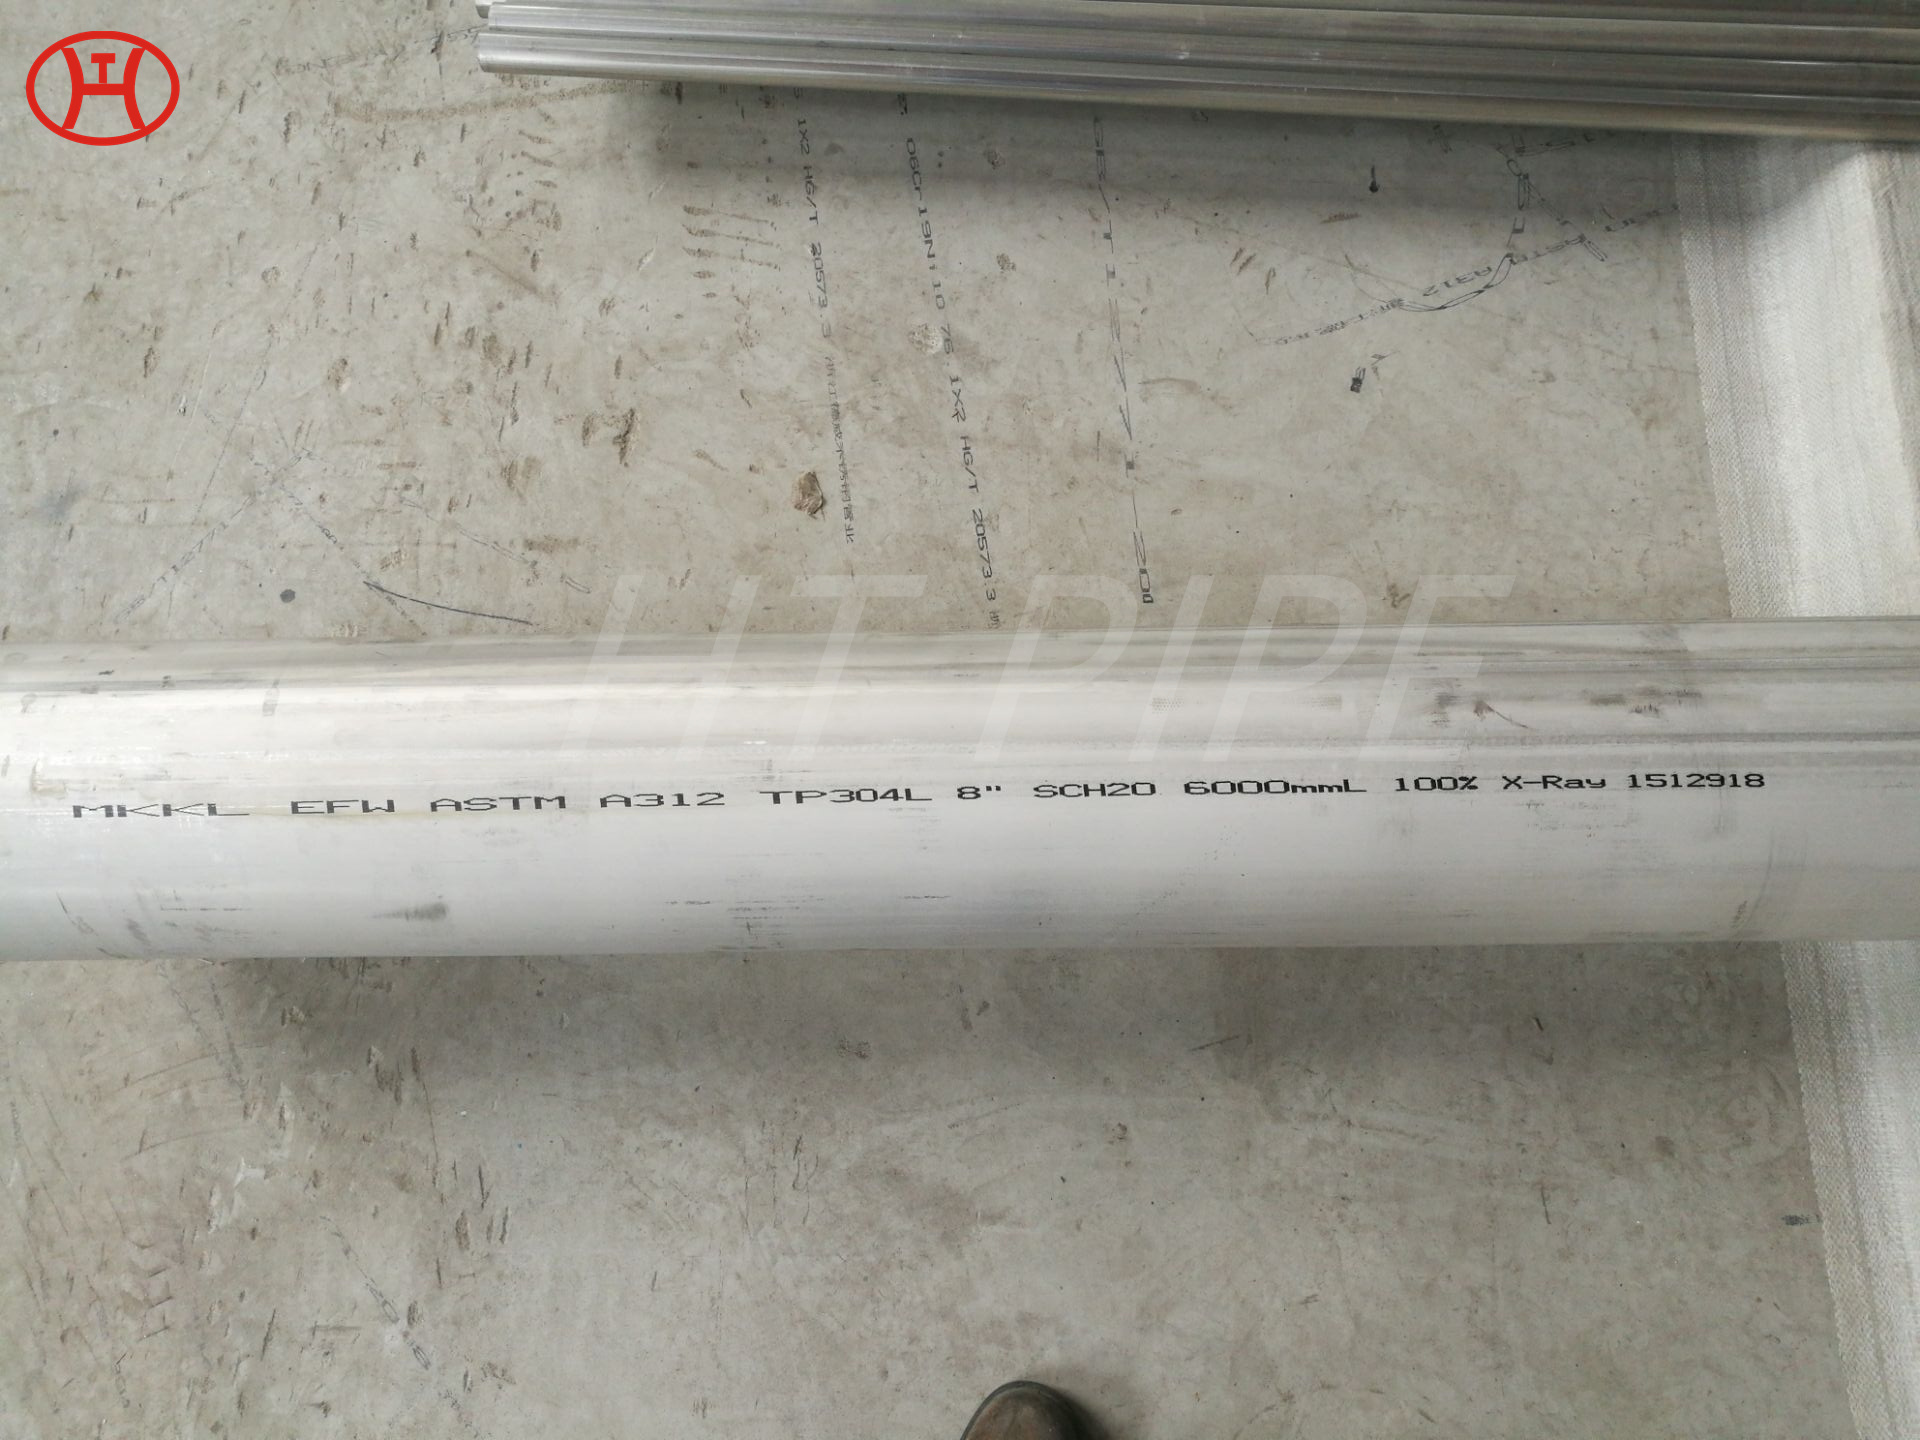 ASTM A312 TP304L EFW pipe